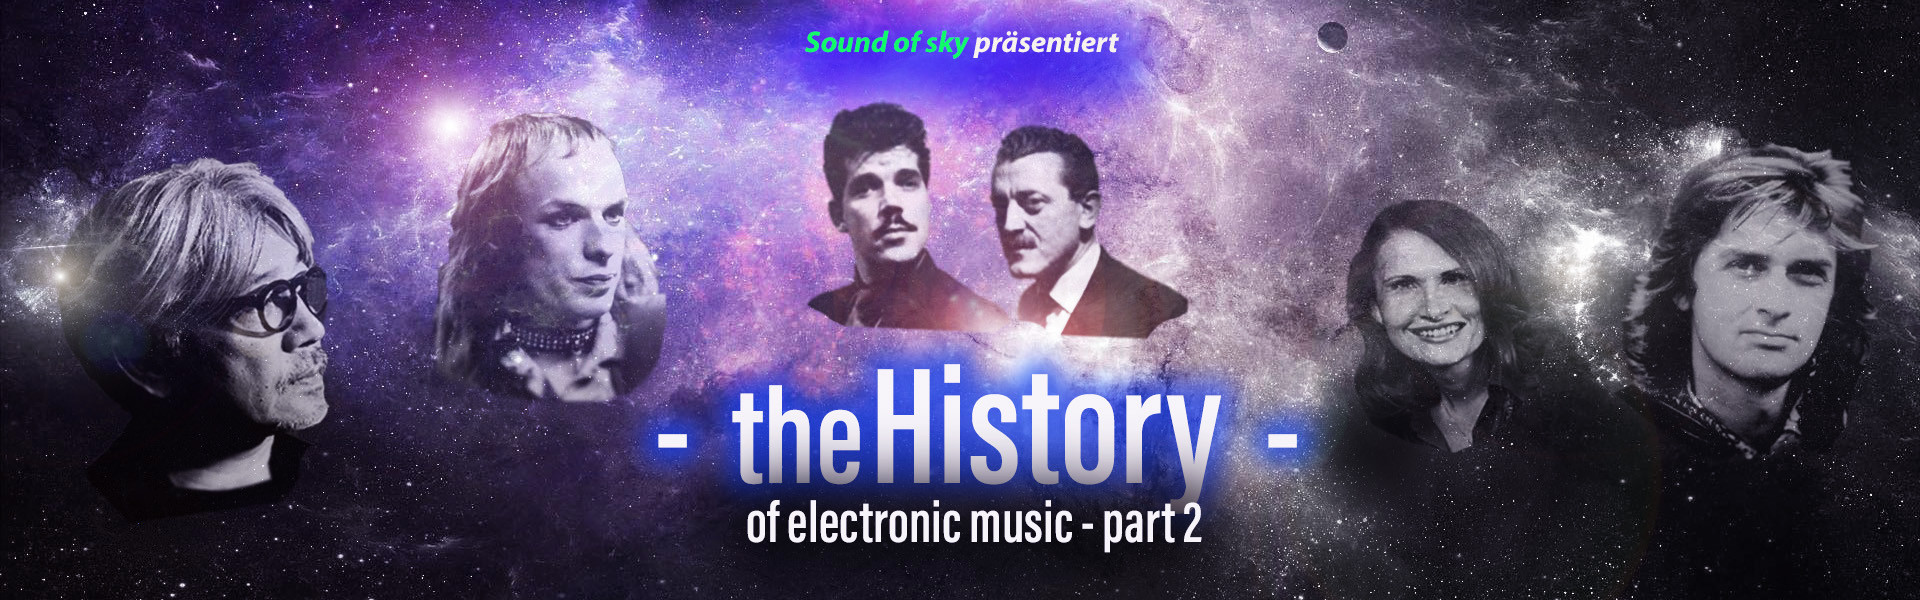 Sound of sky - The history of electronic music II